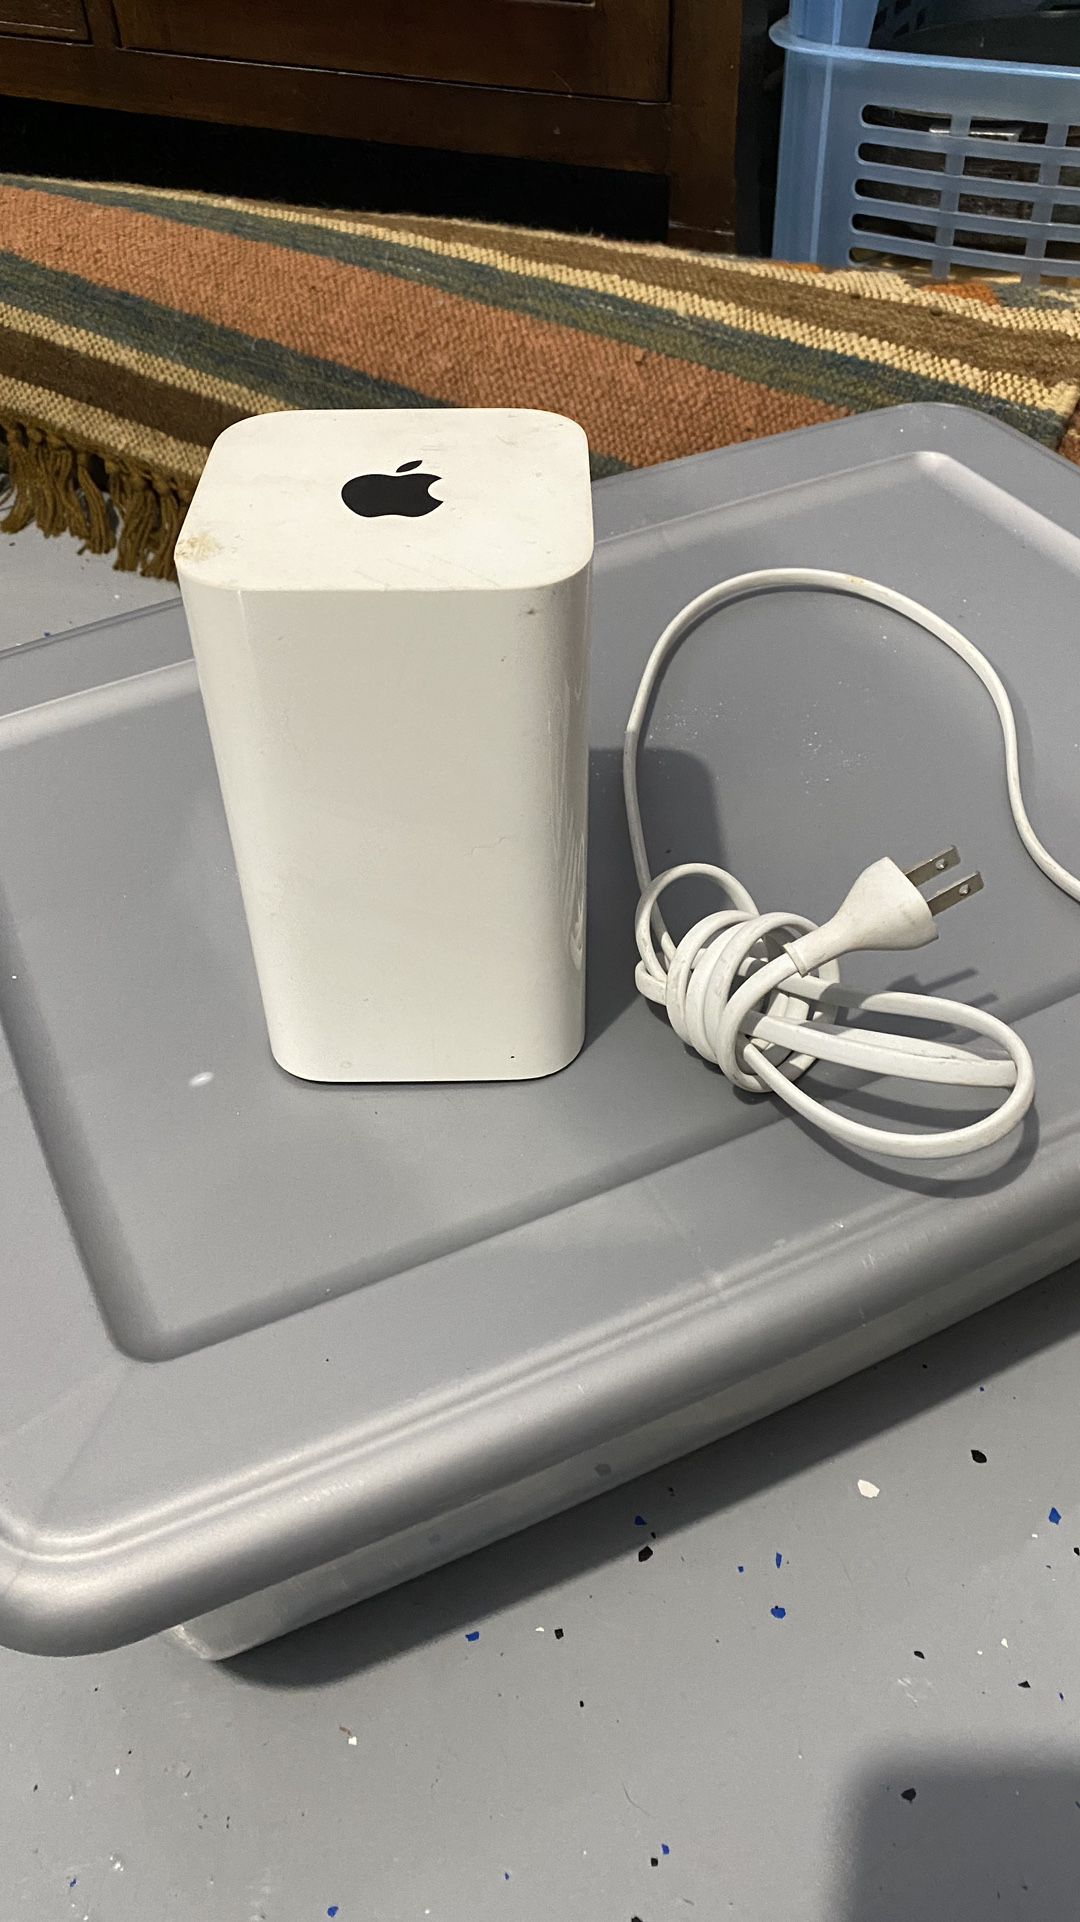 Apple A1521 AirPort Extreme Wireless Router